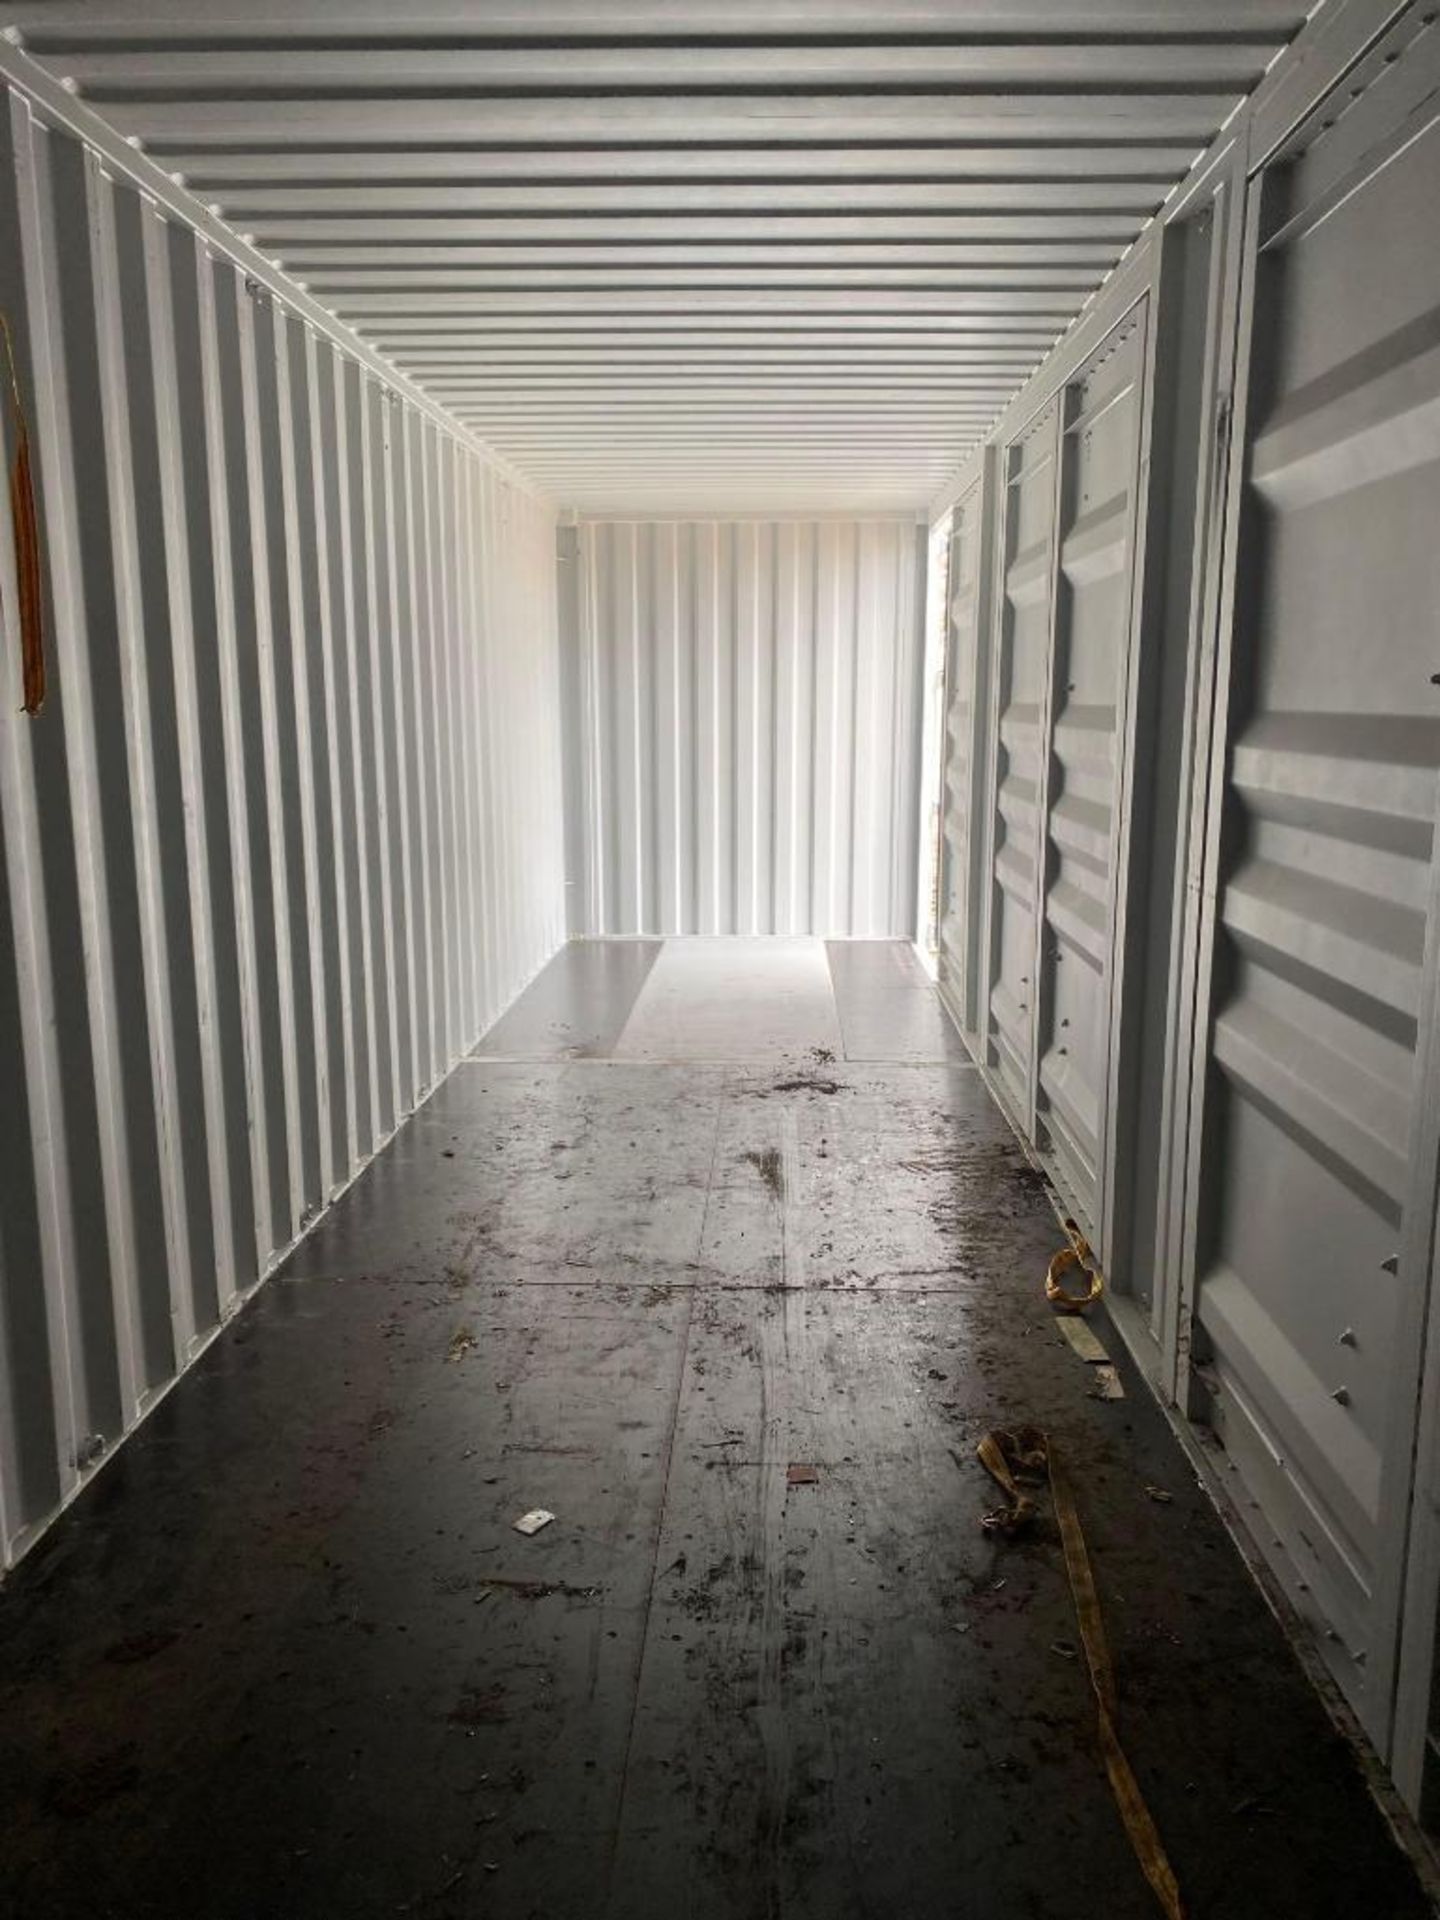 New 40ft (4 side door) Steel Shipping/Storage Container - Image 4 of 5